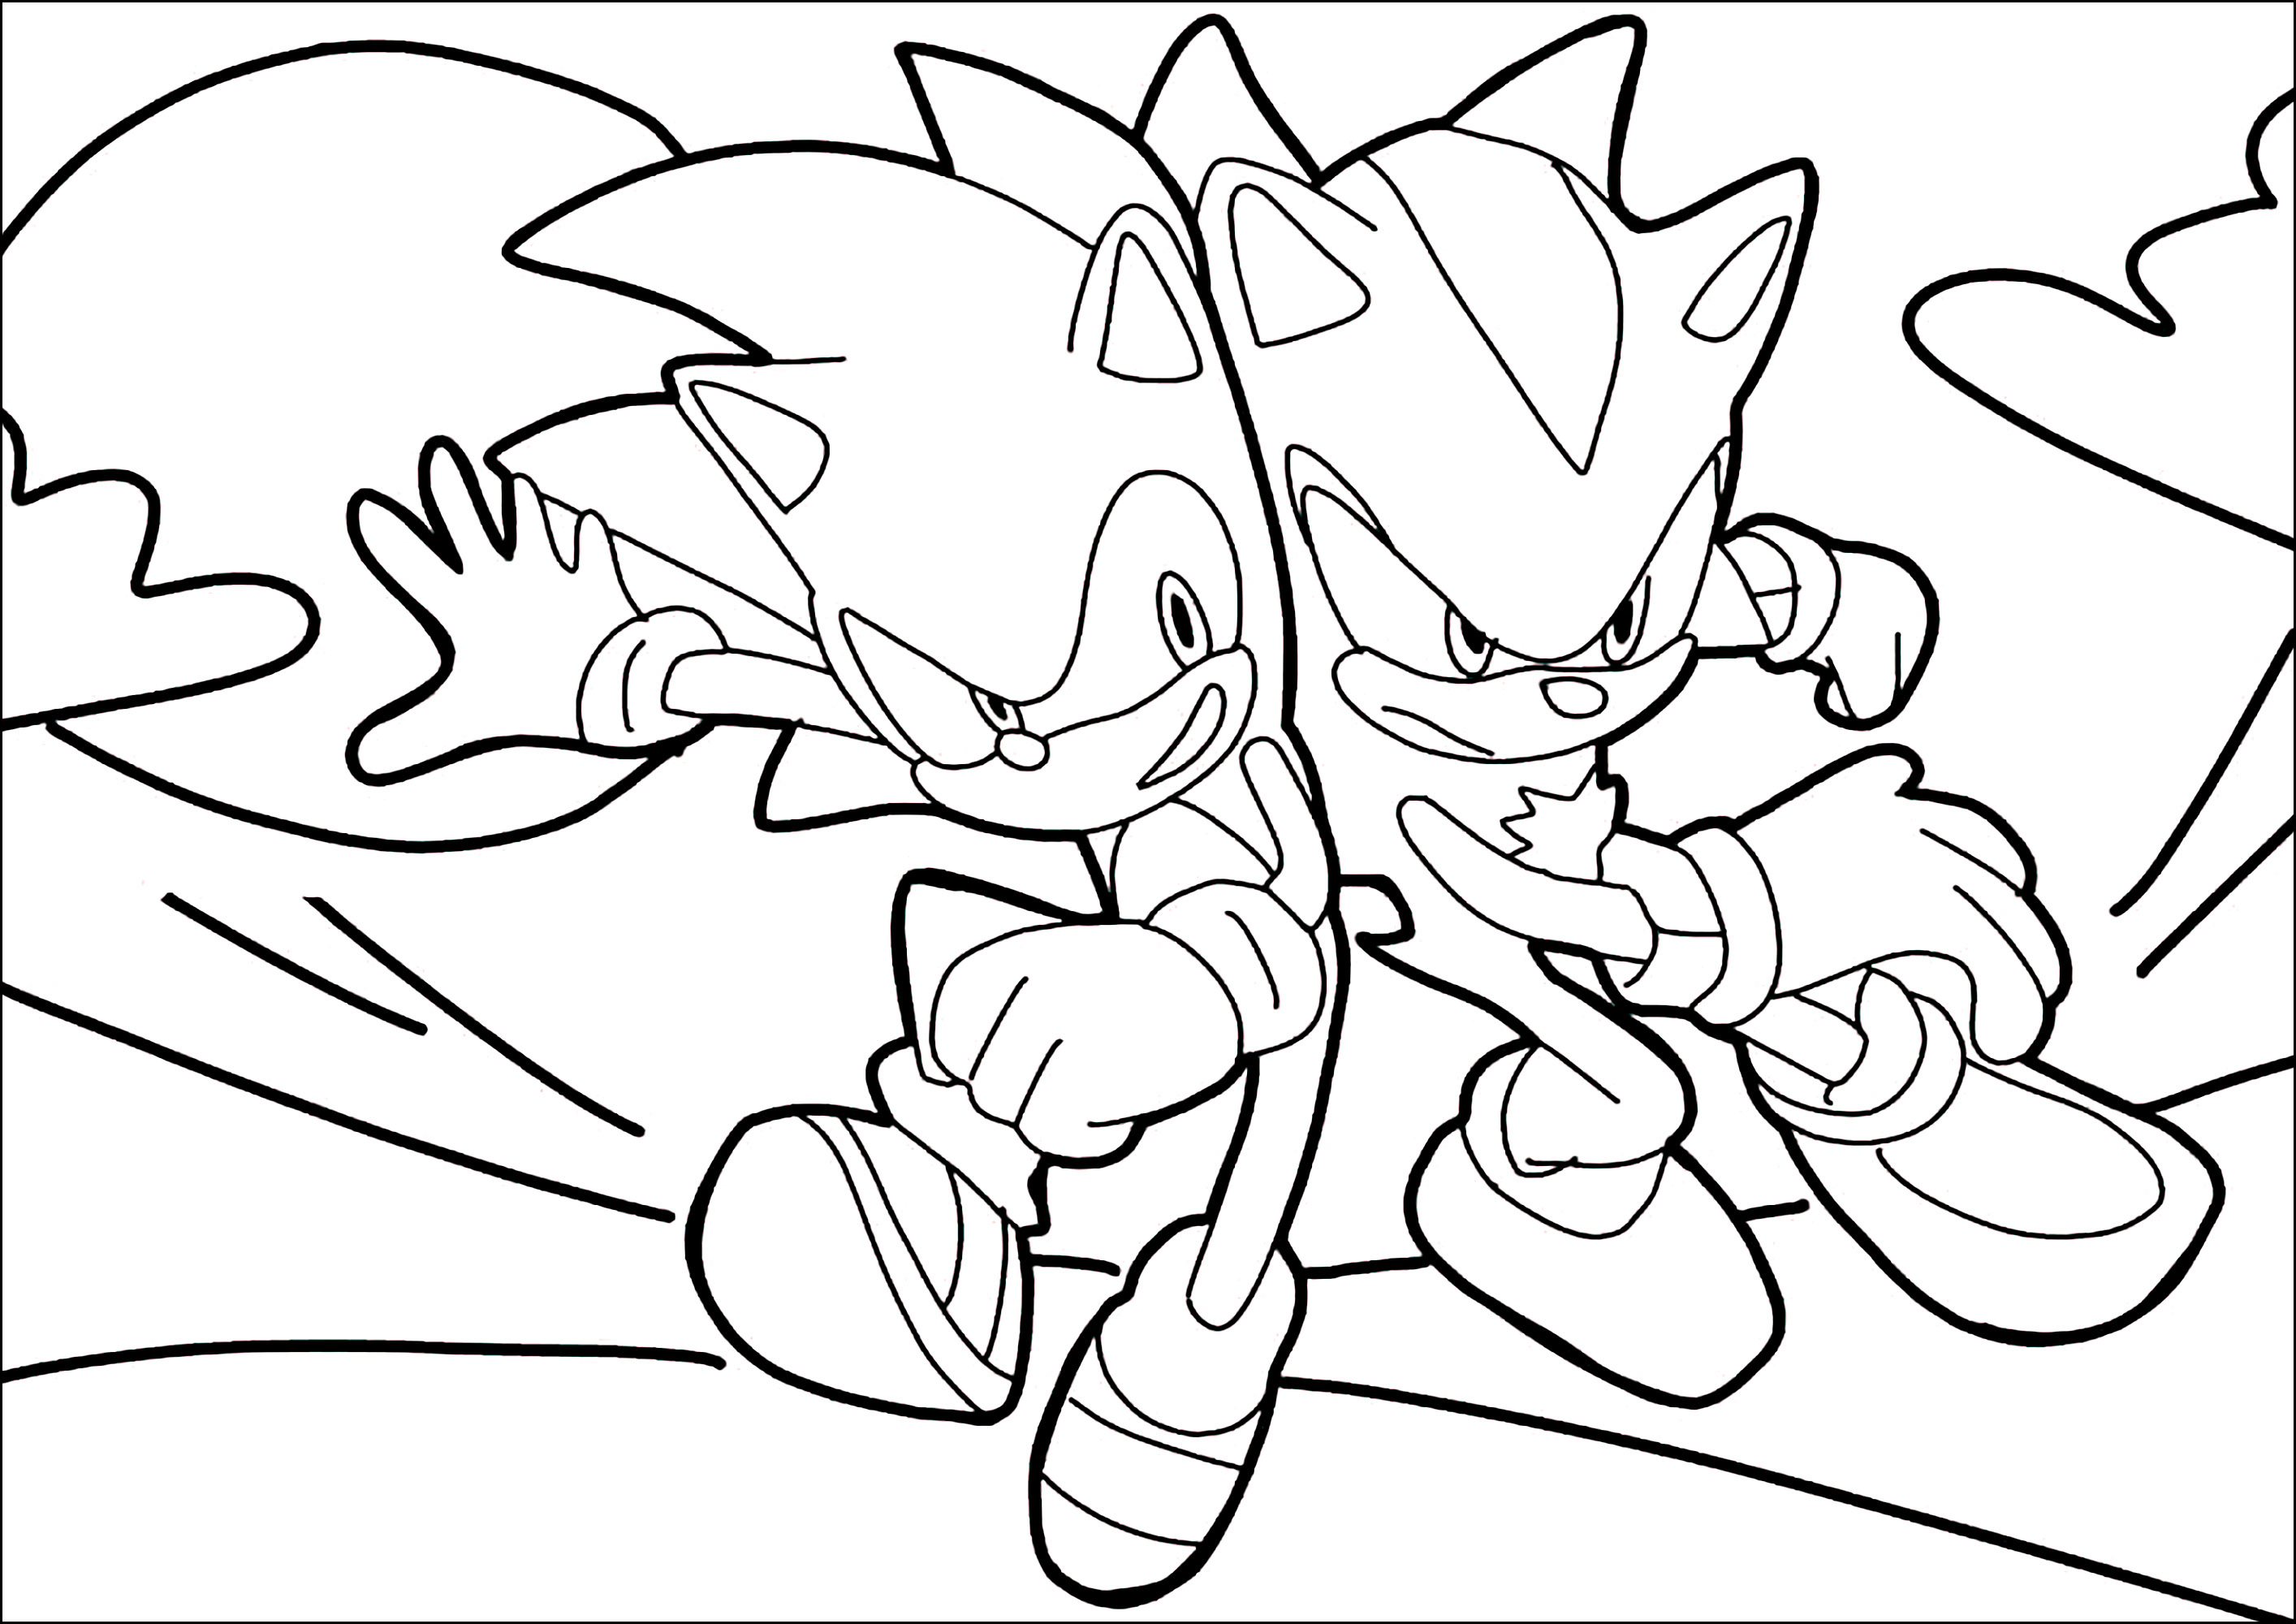 Shadow the Hedgehog Coloring Pages